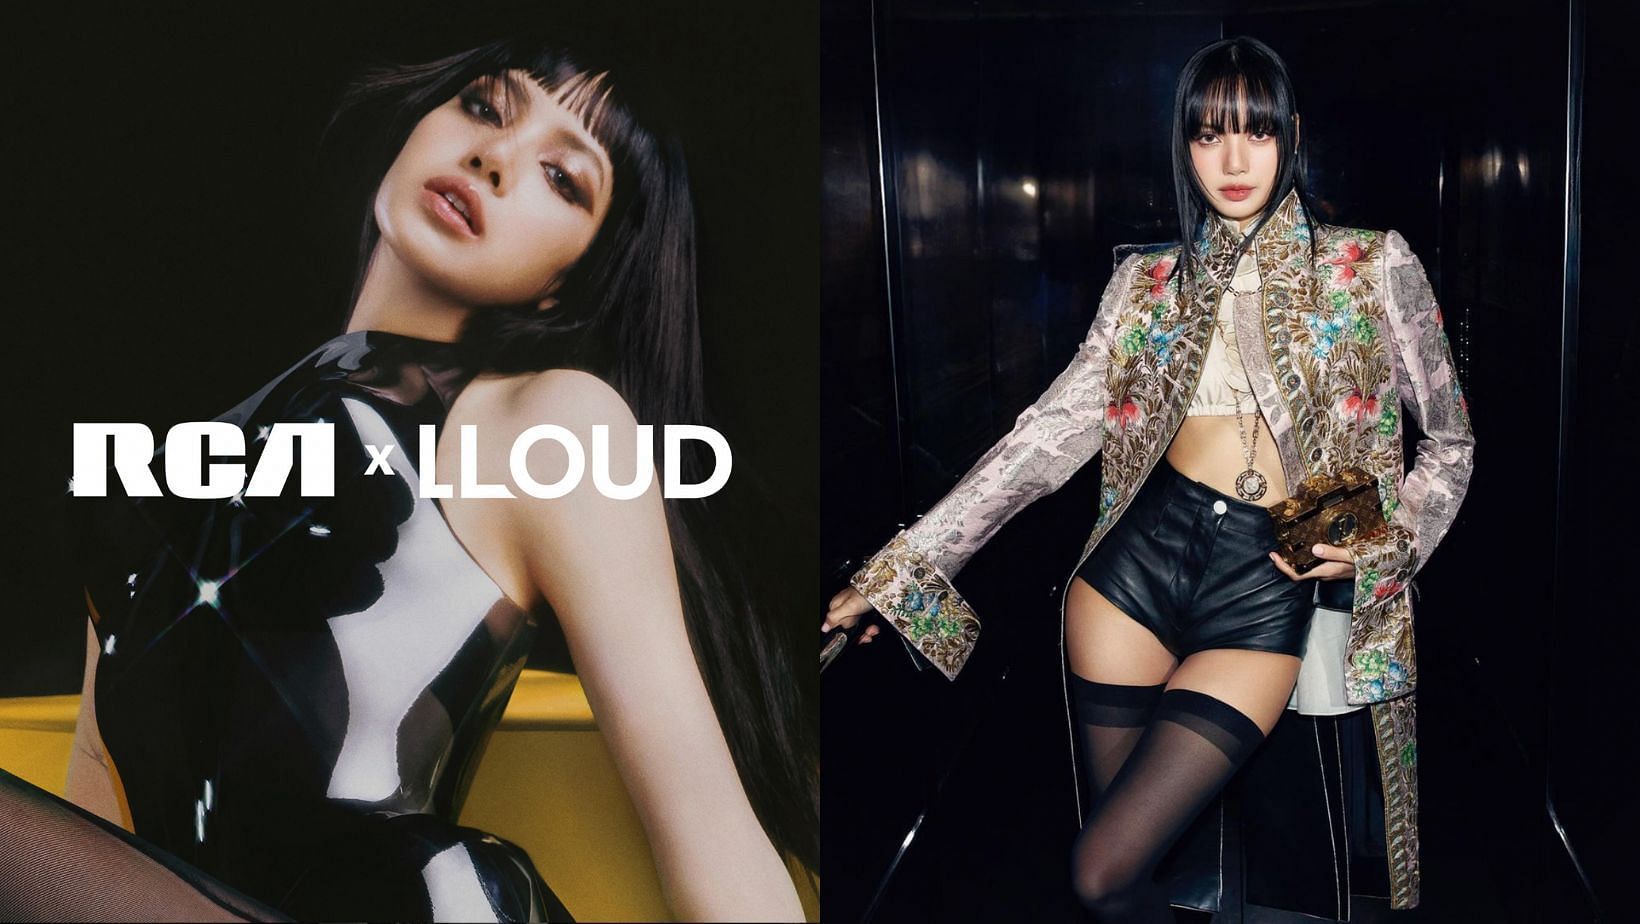 BLACKPINK&rsquo;s Lisa company LLOUD announces partnership with RCA, teases solo comeback as part of the deal